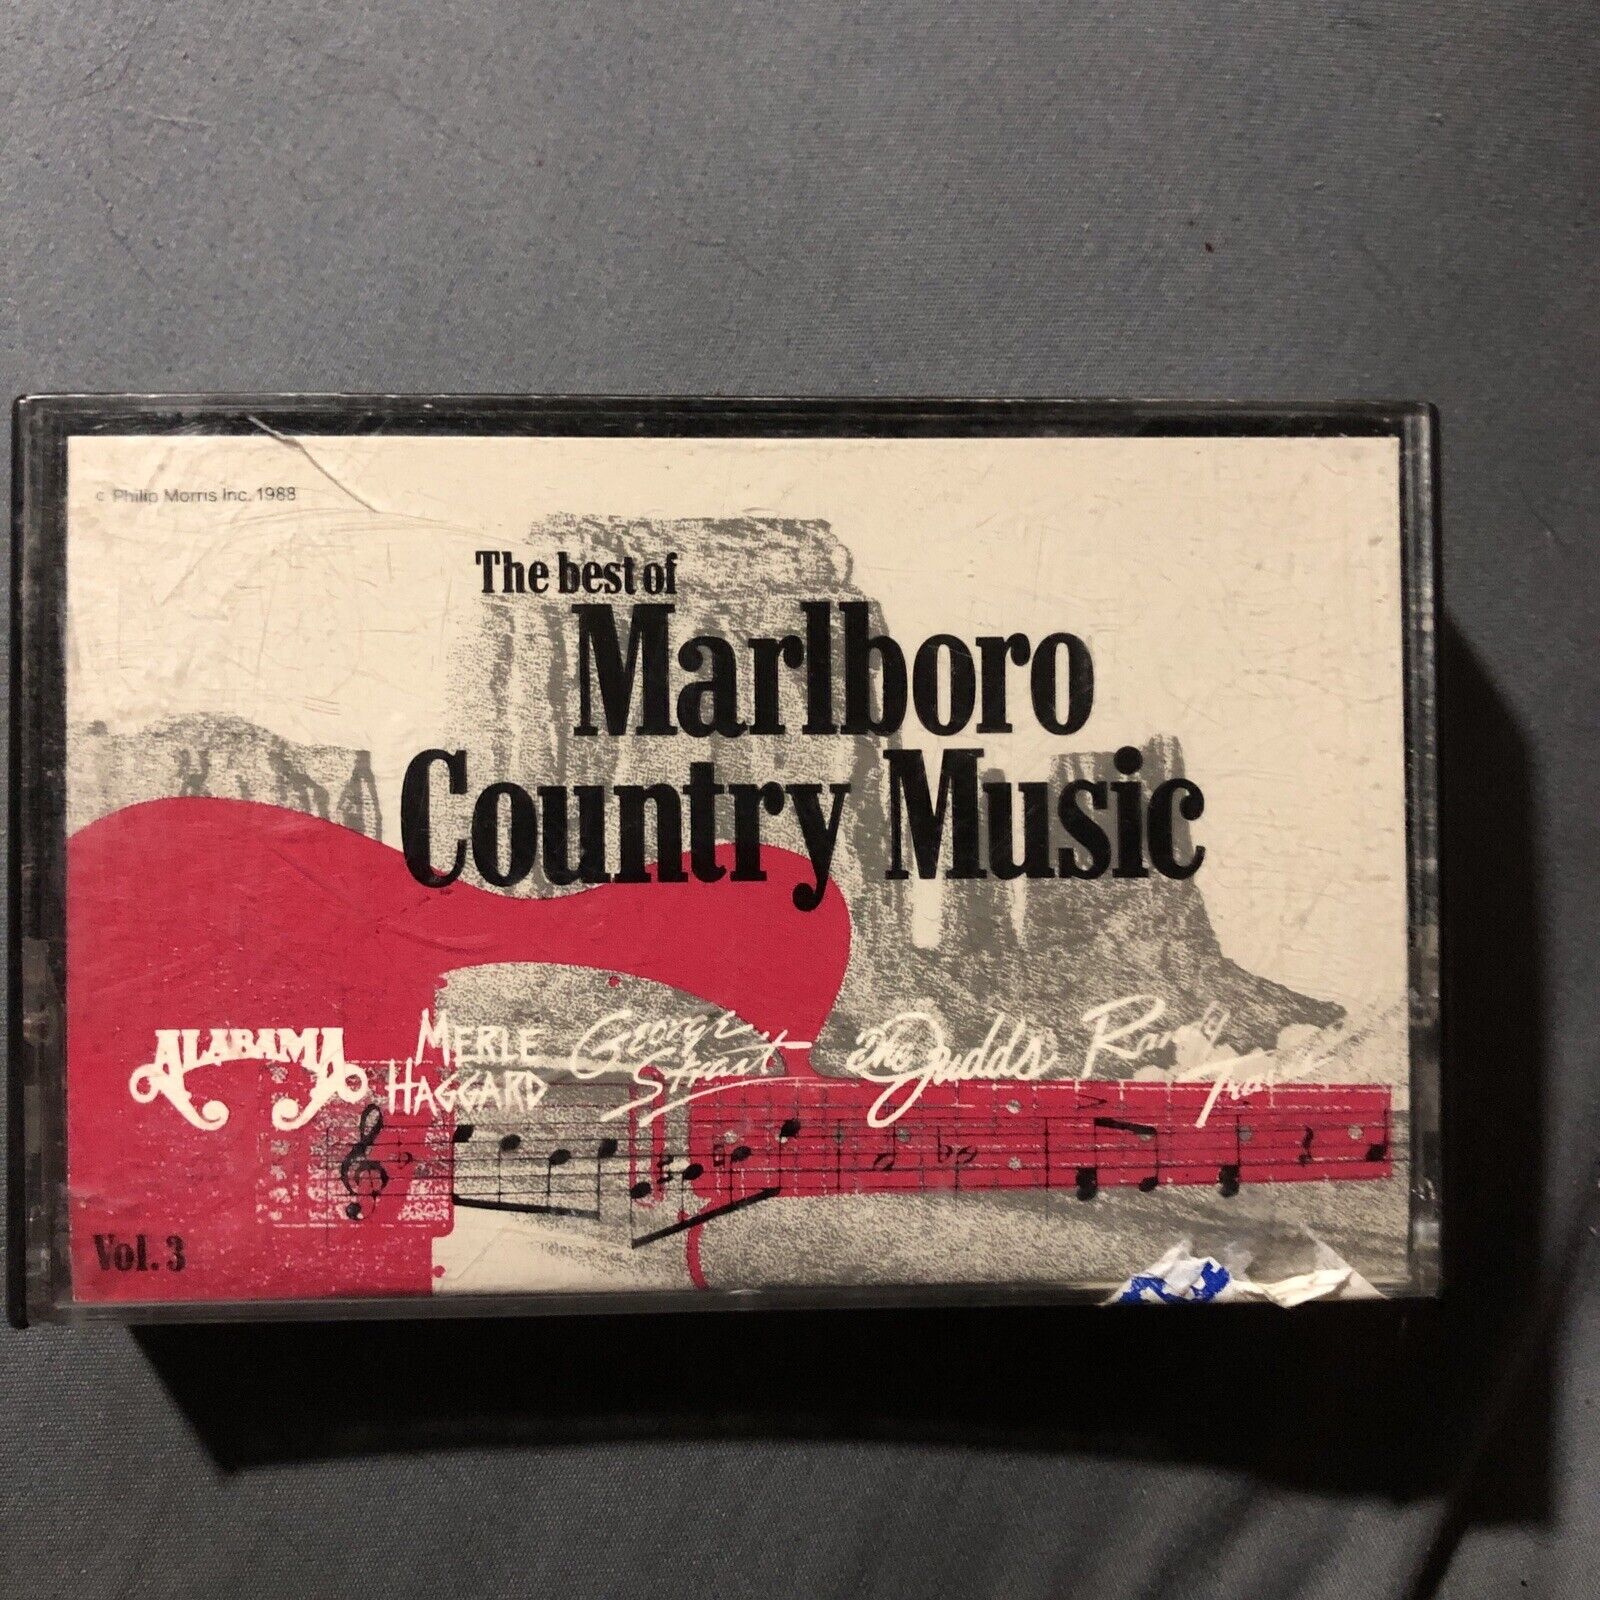 The Best of Marlboro Country Music Volume 3 Cassette Tape Various Artists 1987